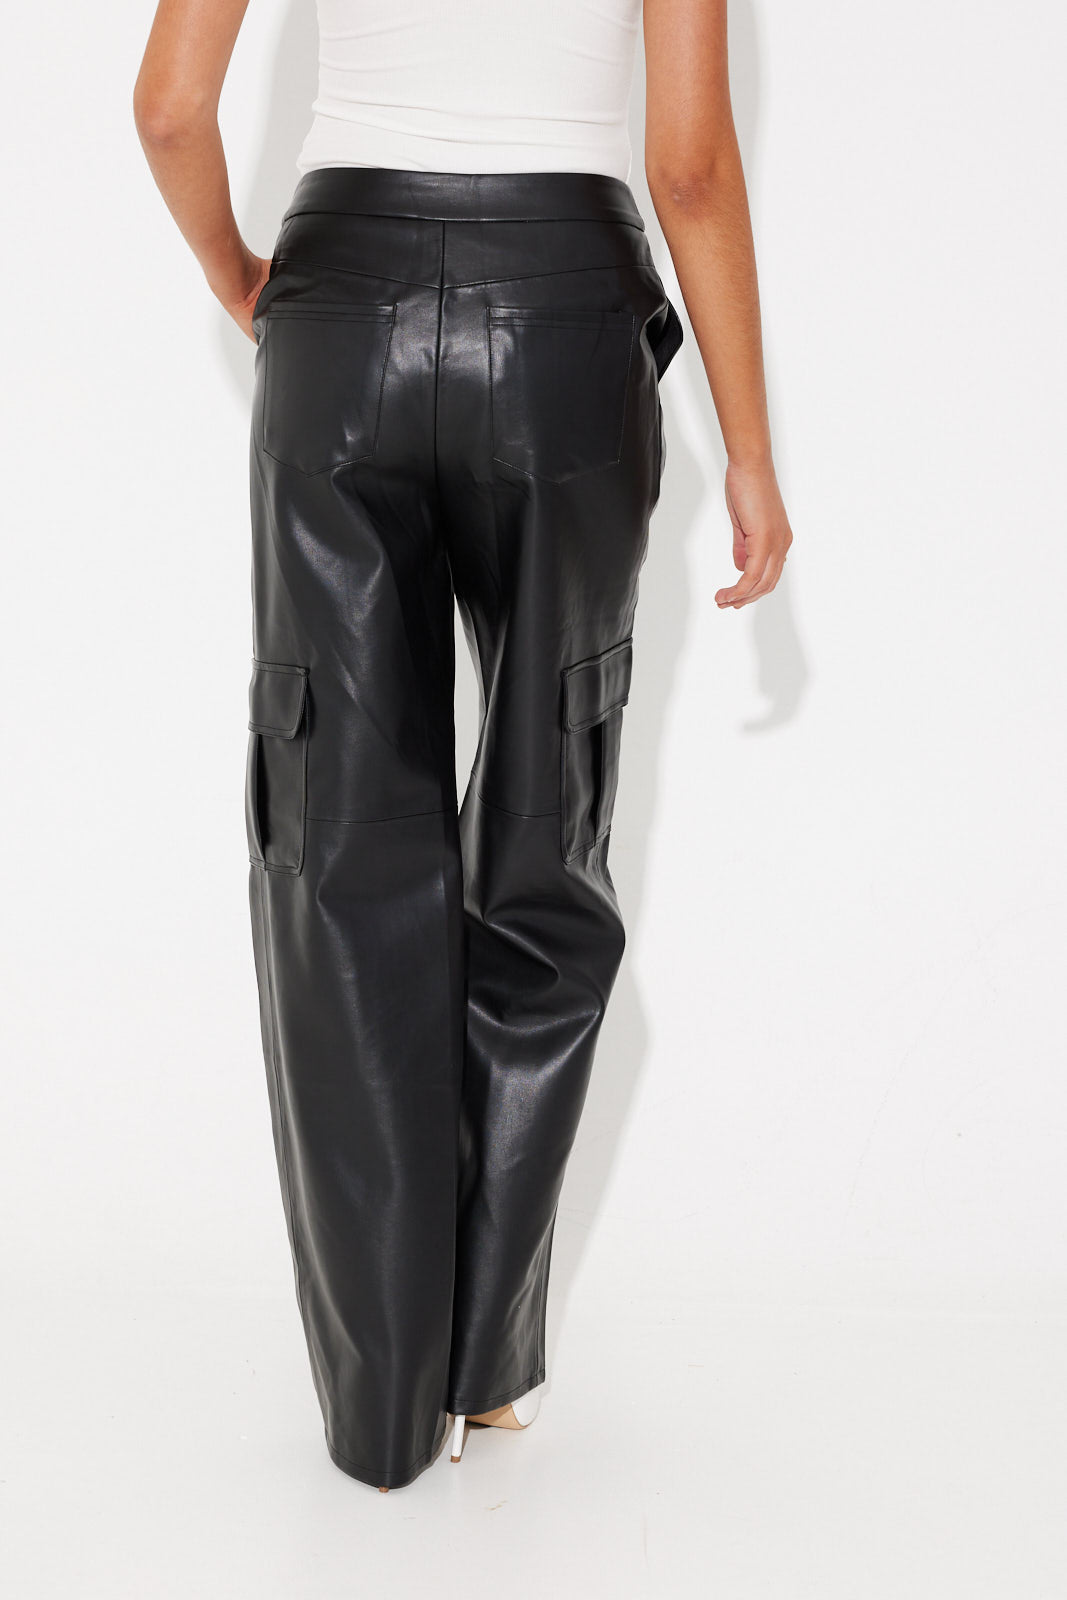 Lioness Miami Vice Faux Leather Cargo Pant  Urban Outfitters Korea   Clothing Music Home  Accessories